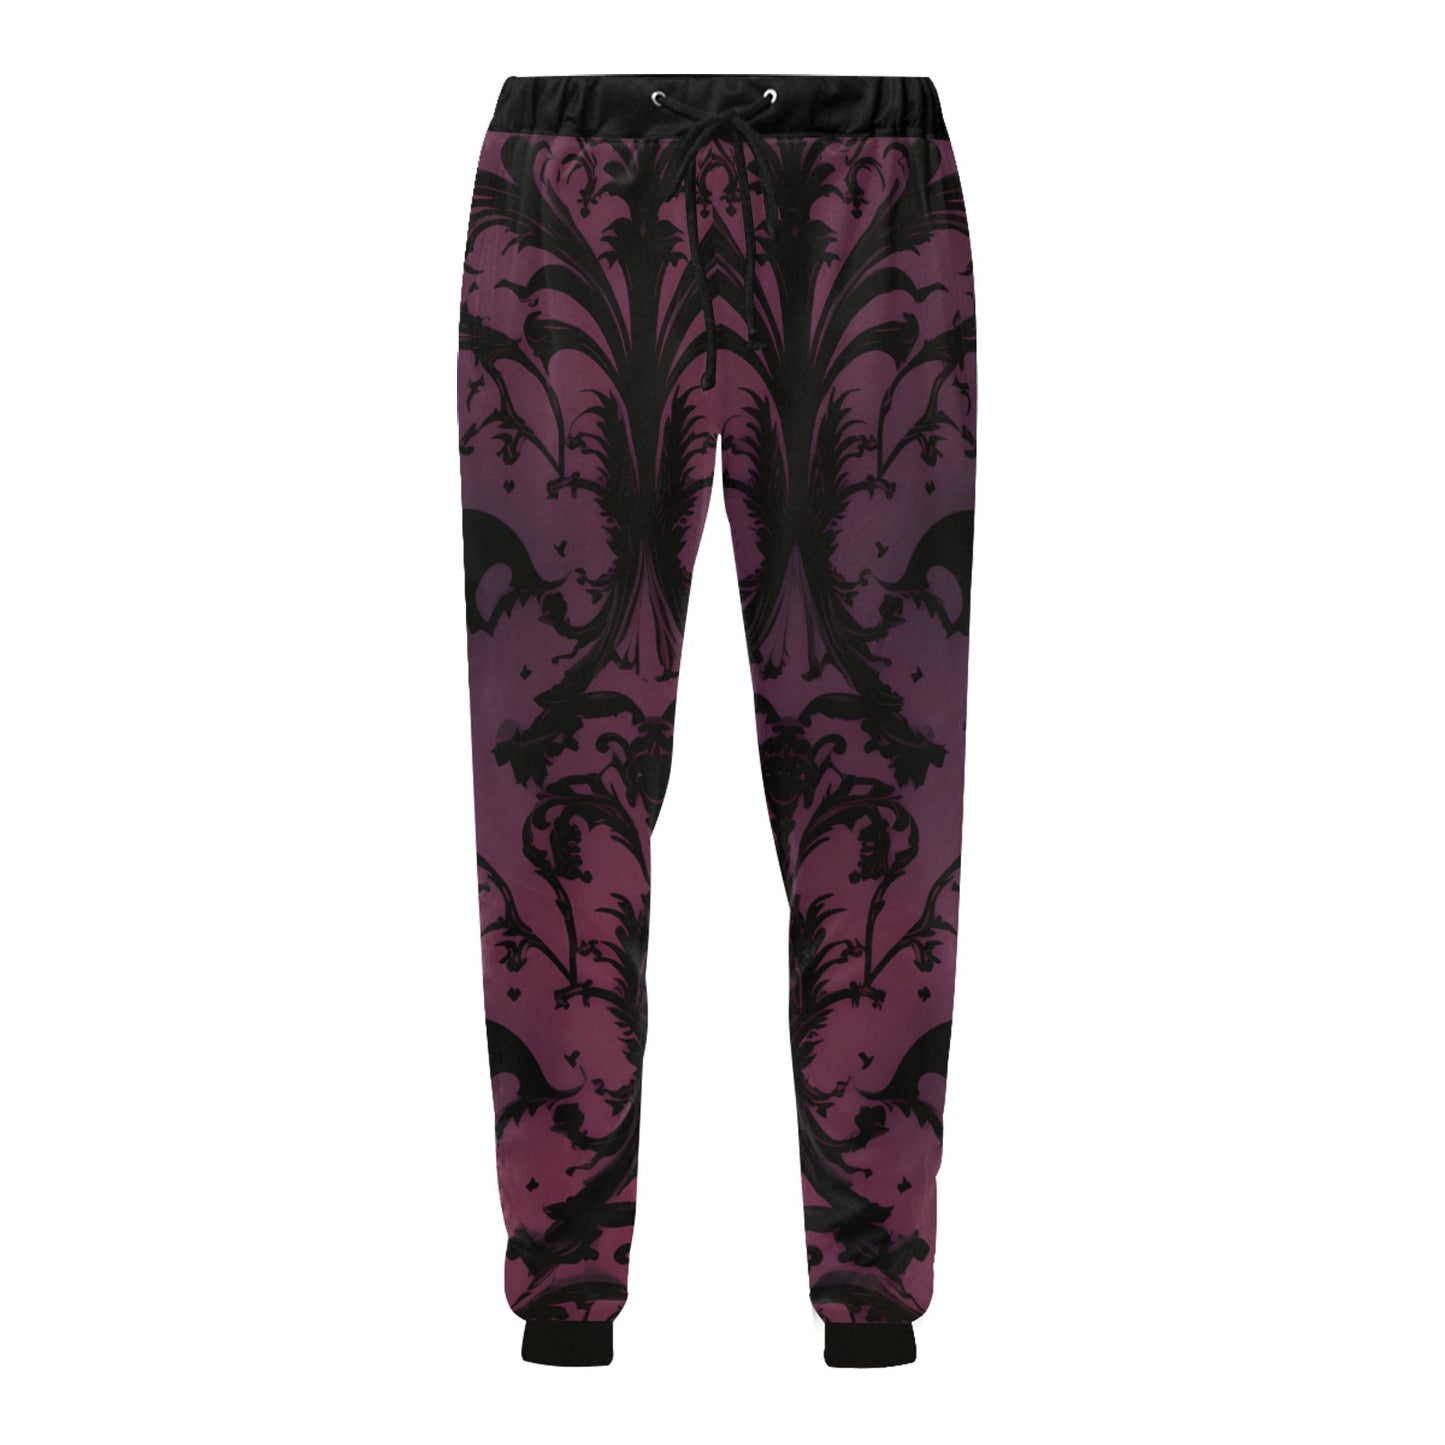 Gothic Purple And Black Pattern Casual Sweatpants